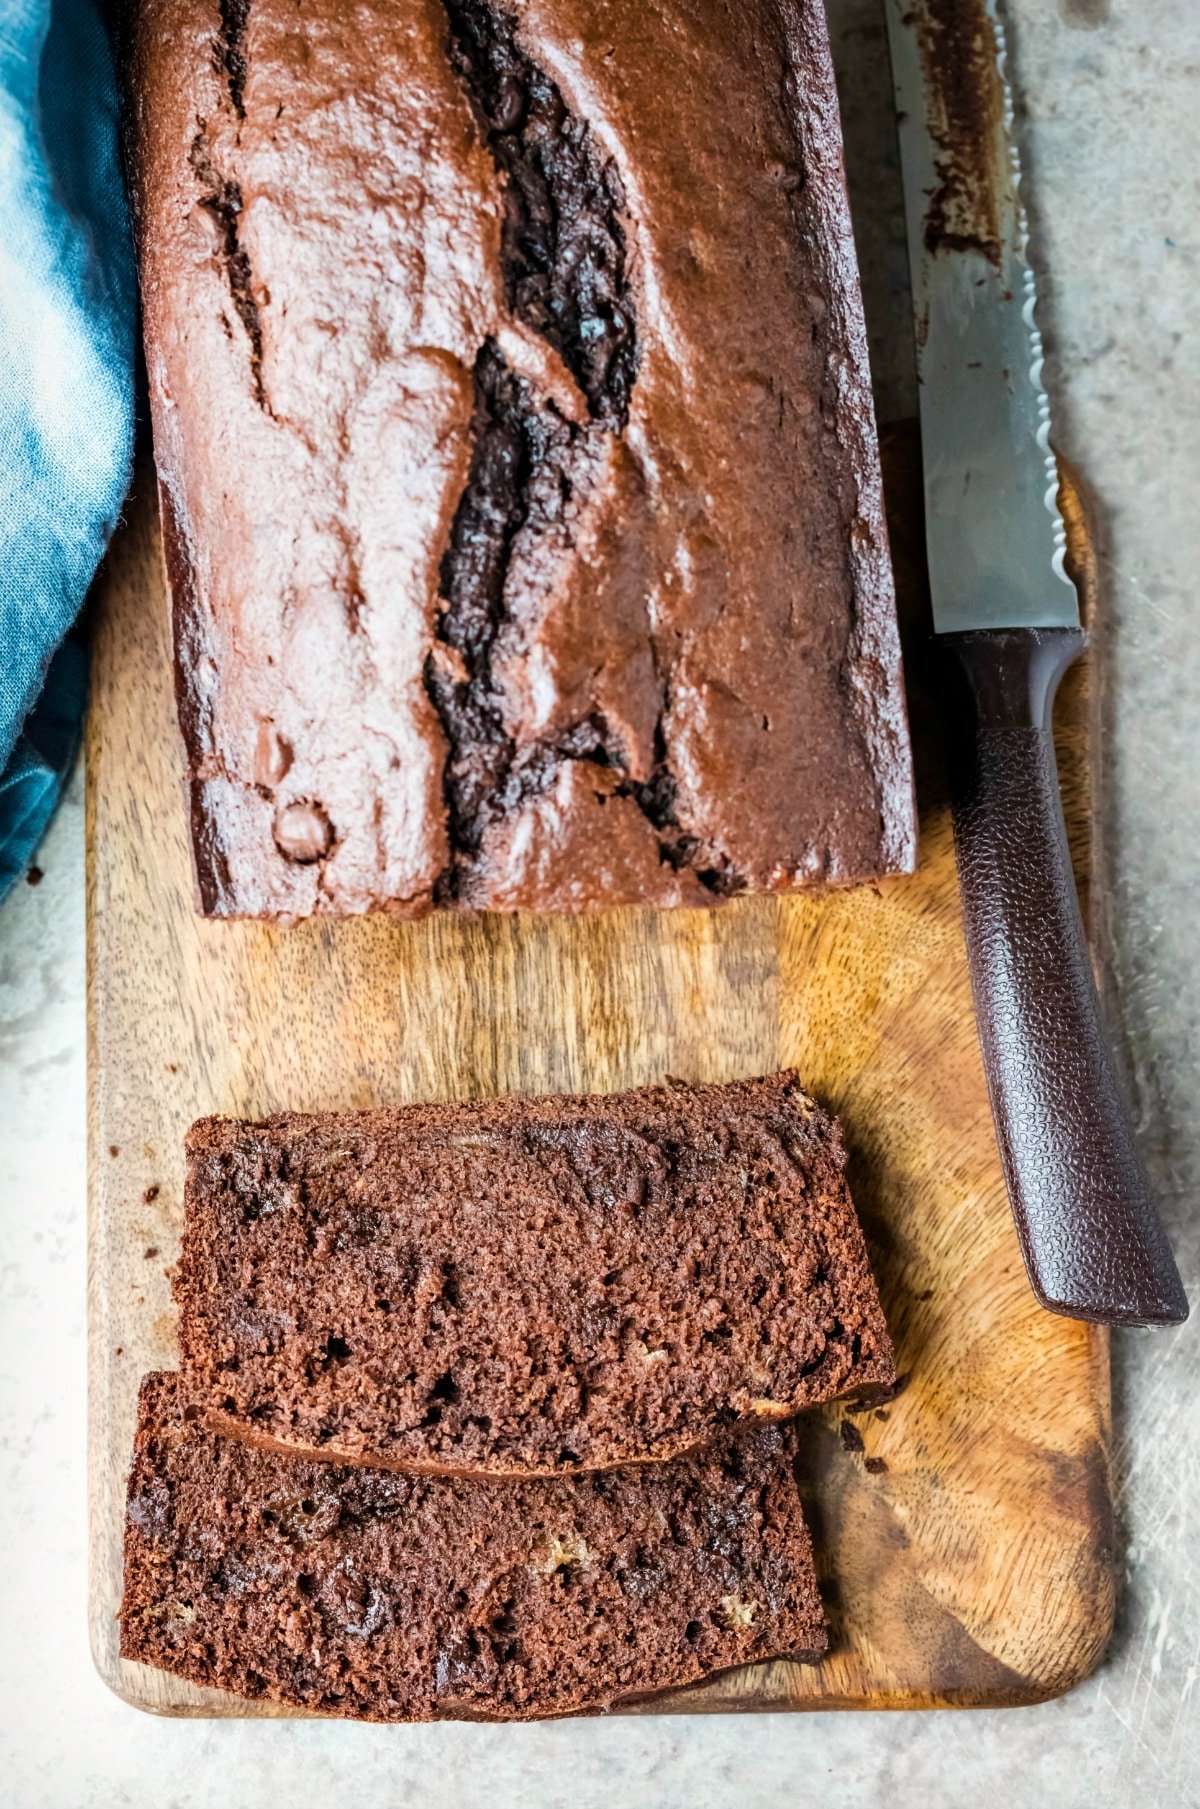 Two slices of chocolate banana bread on a wooden cutting board